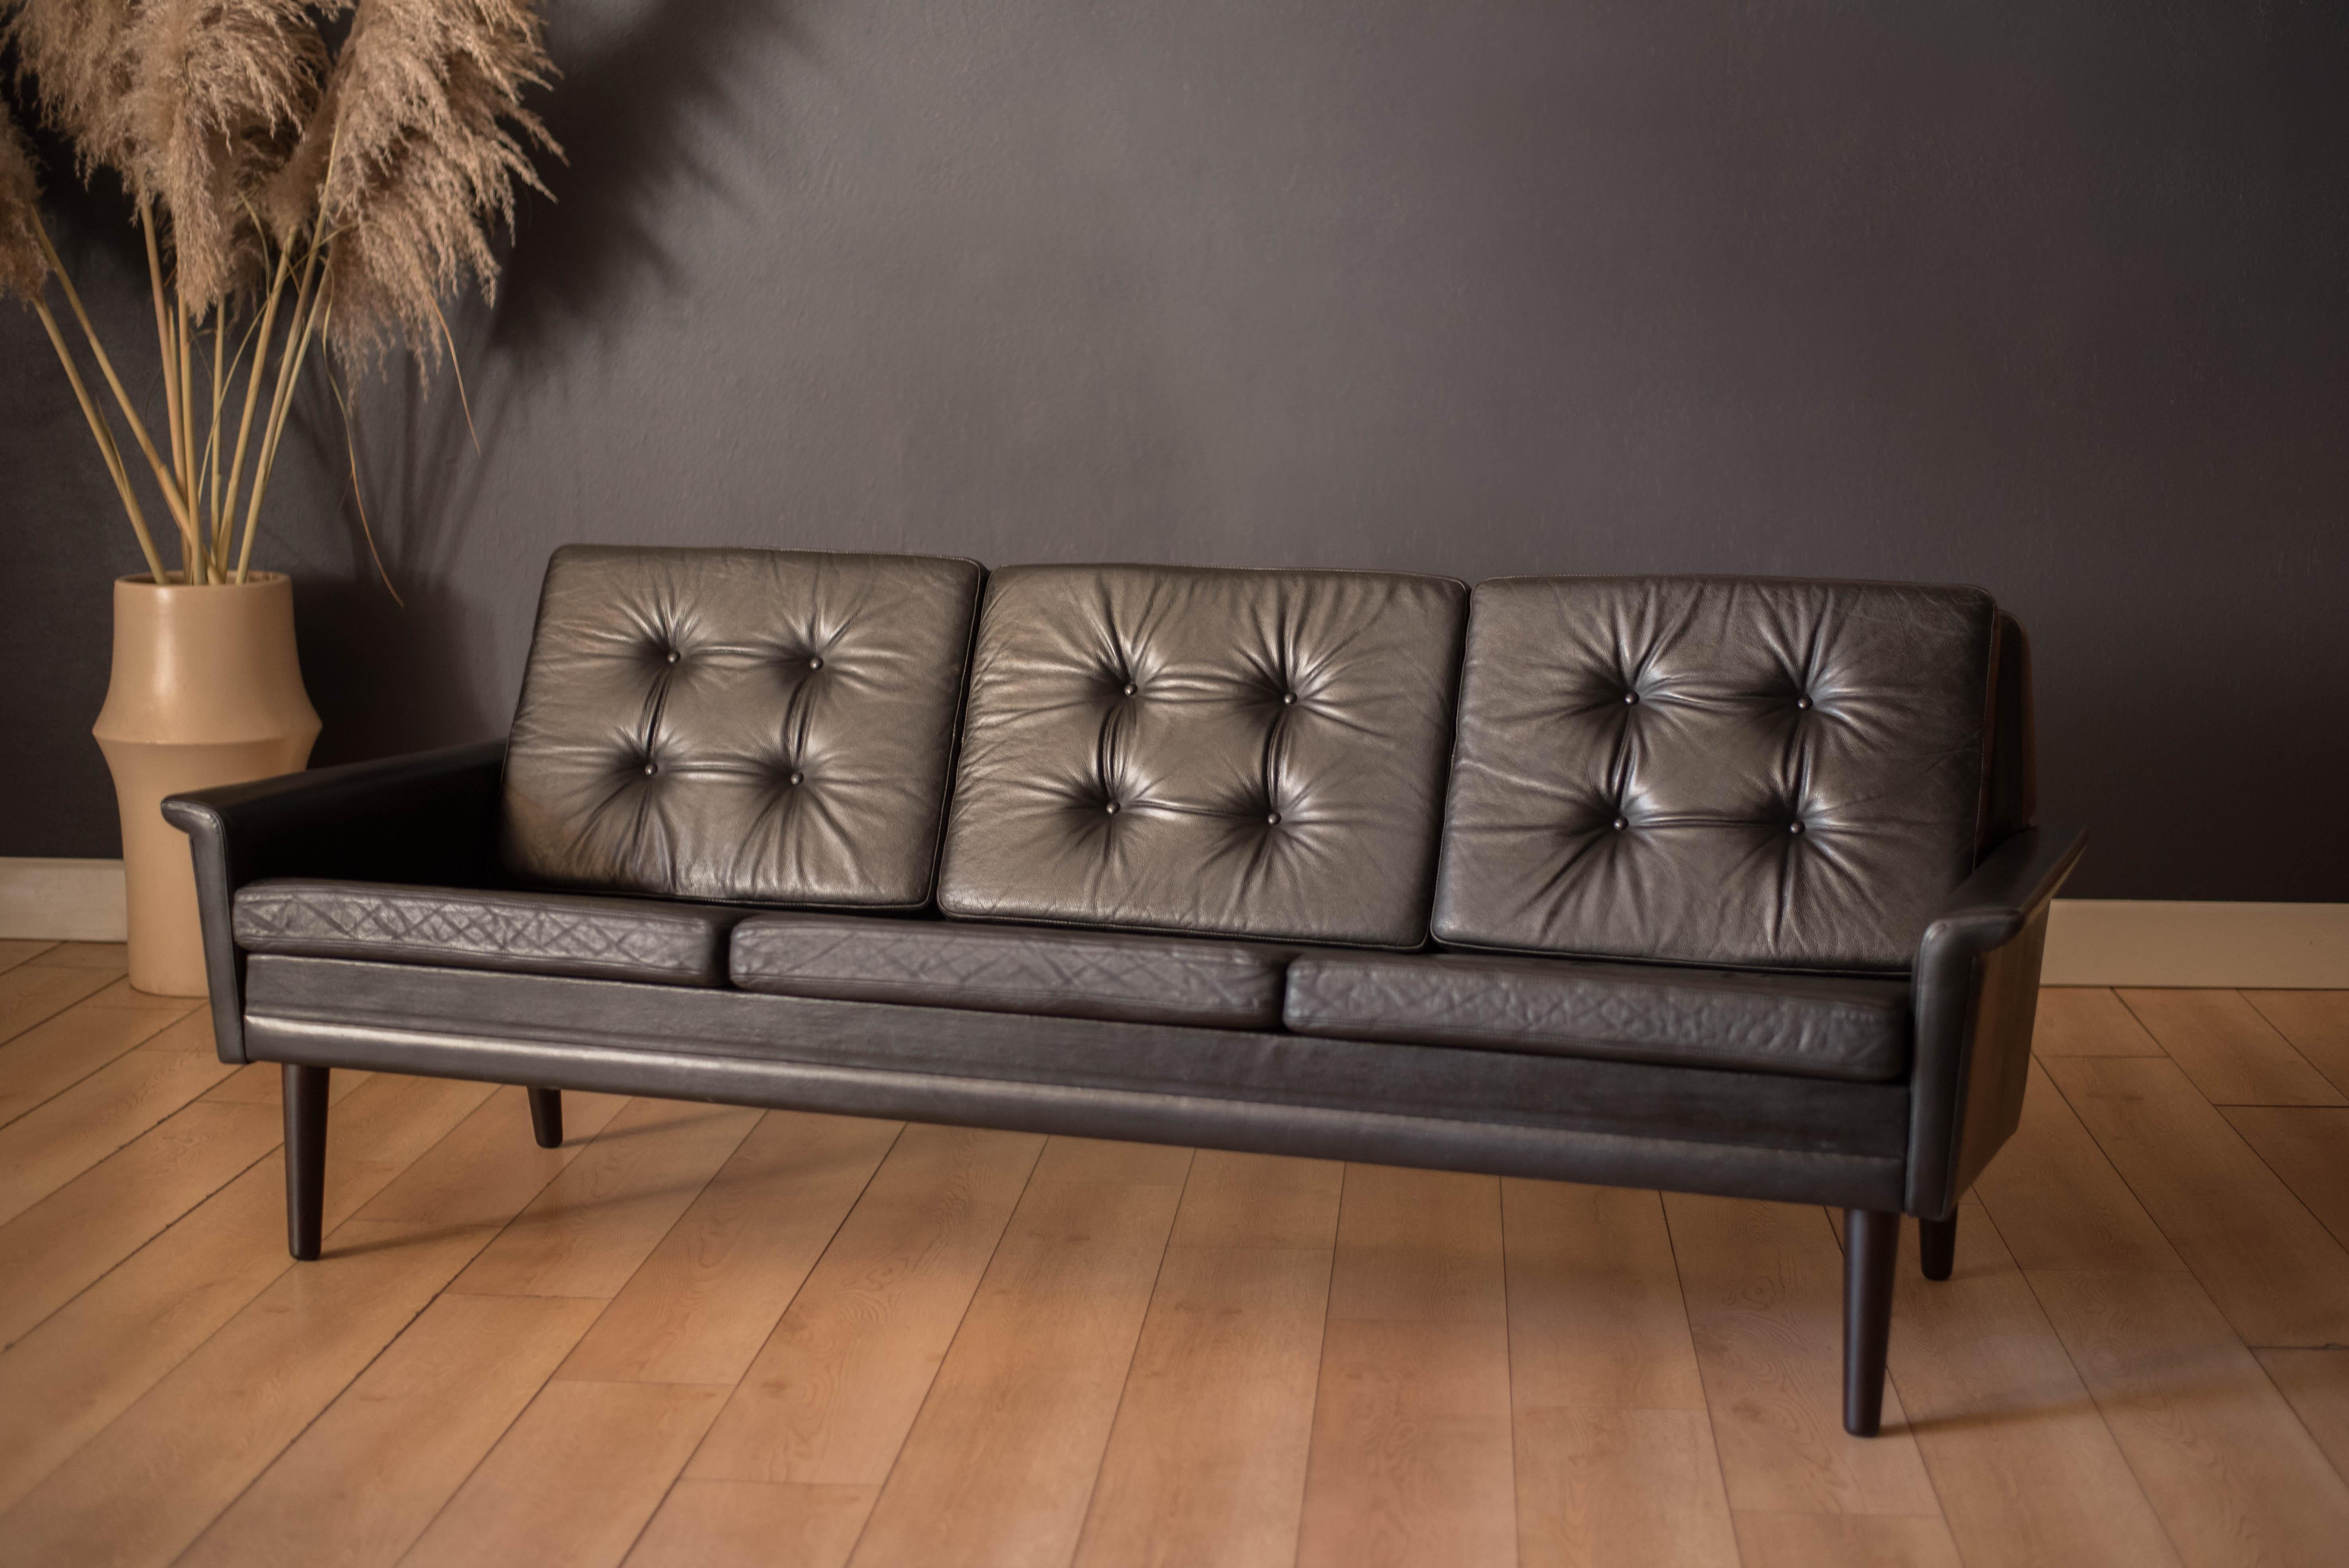 Mid century modern 3-seater sofa in rosewood and leather circa 1960's, Denmark. This comfortable statement piece can be displayed from any angle and features sculptural curved armrests. Retains the original patinated black leather designed with